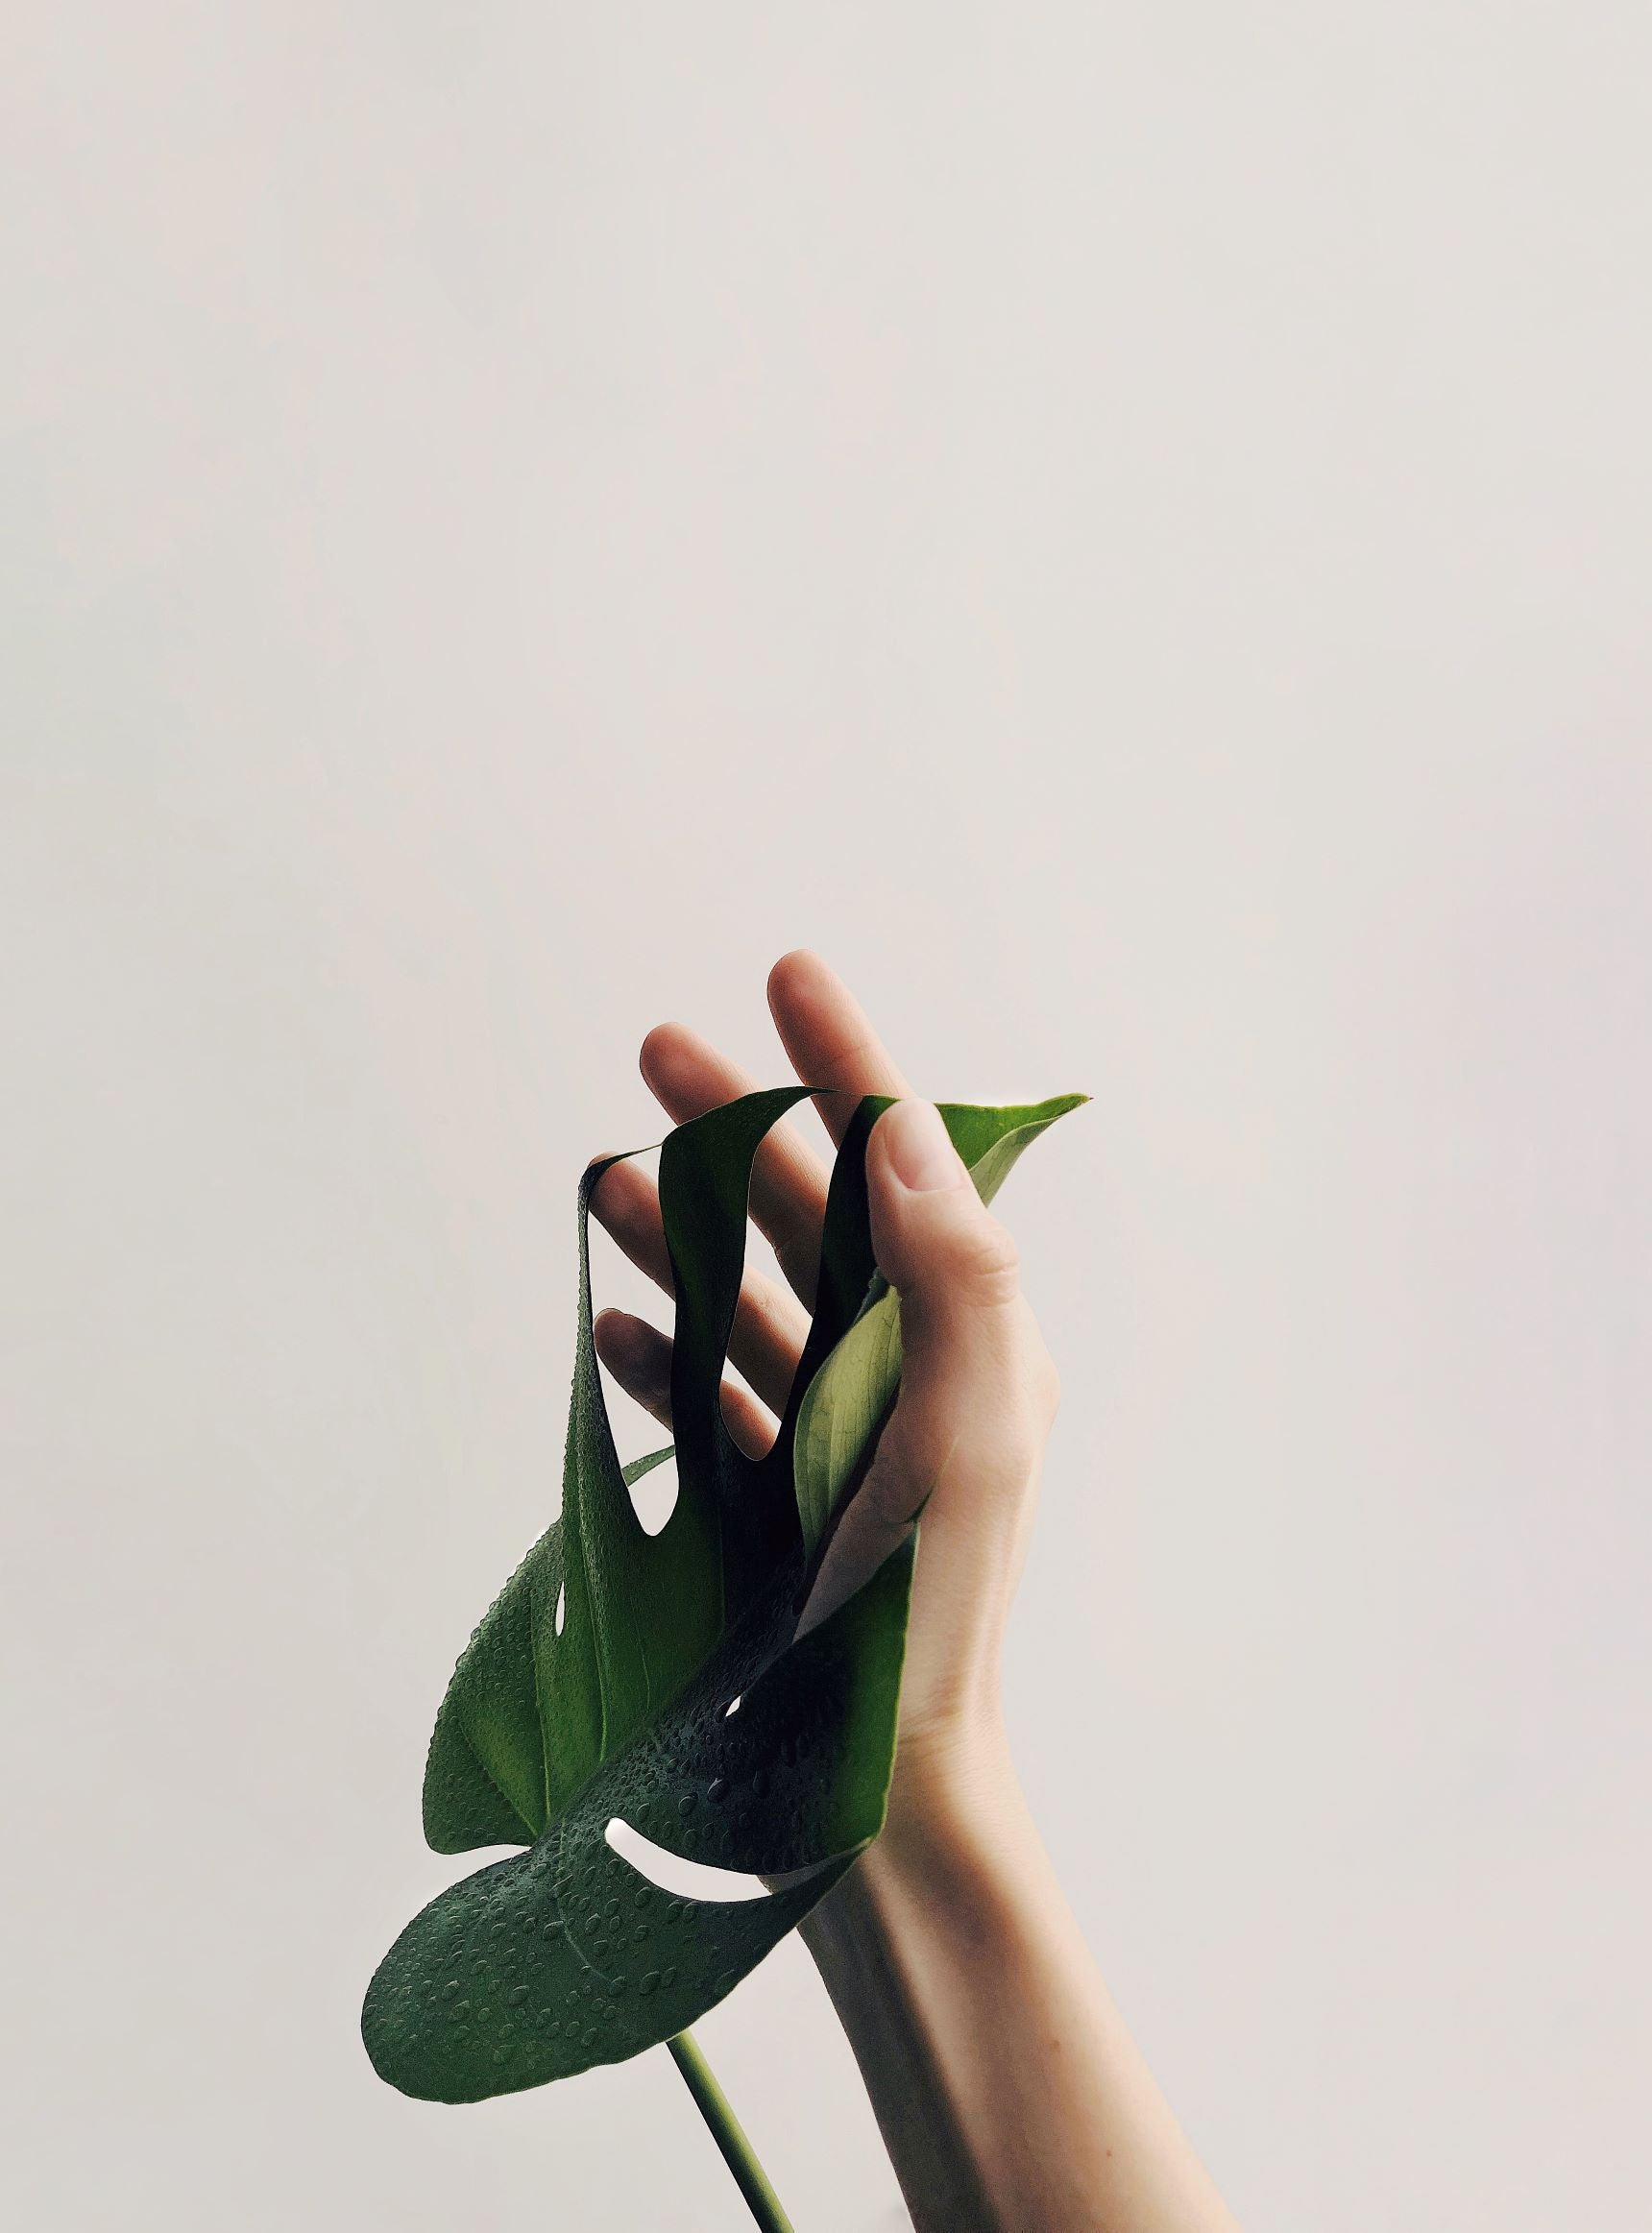 monstera swiss cheese plant leaf being held by persons hand